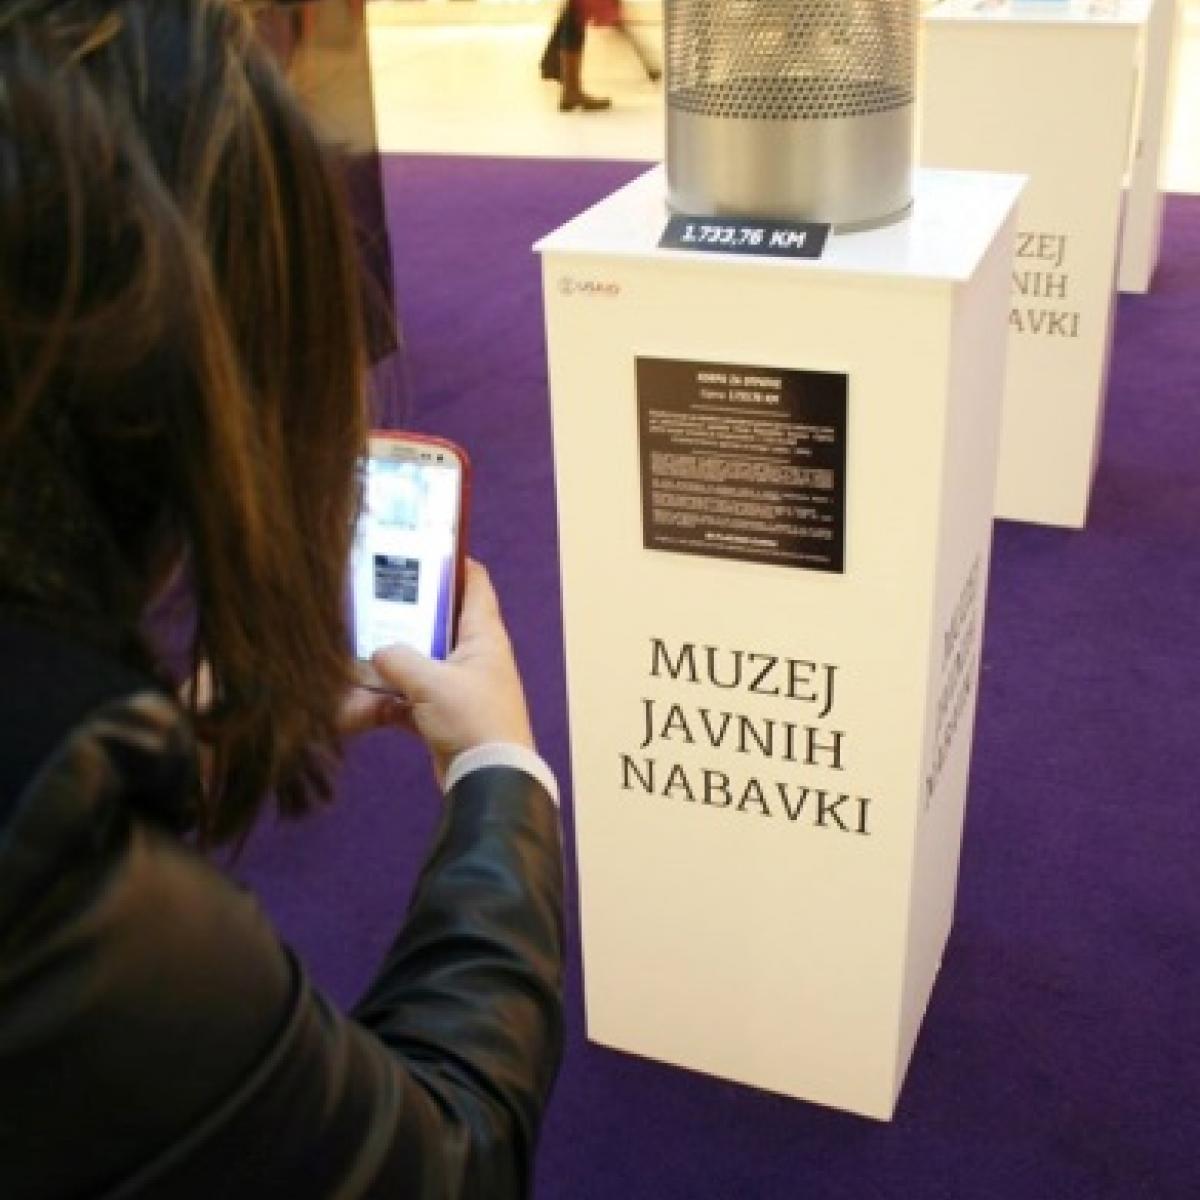  Citizen takes photos of $938 wastebasket bought by government, during "We Pay the Price" campaign in Sarajevo.